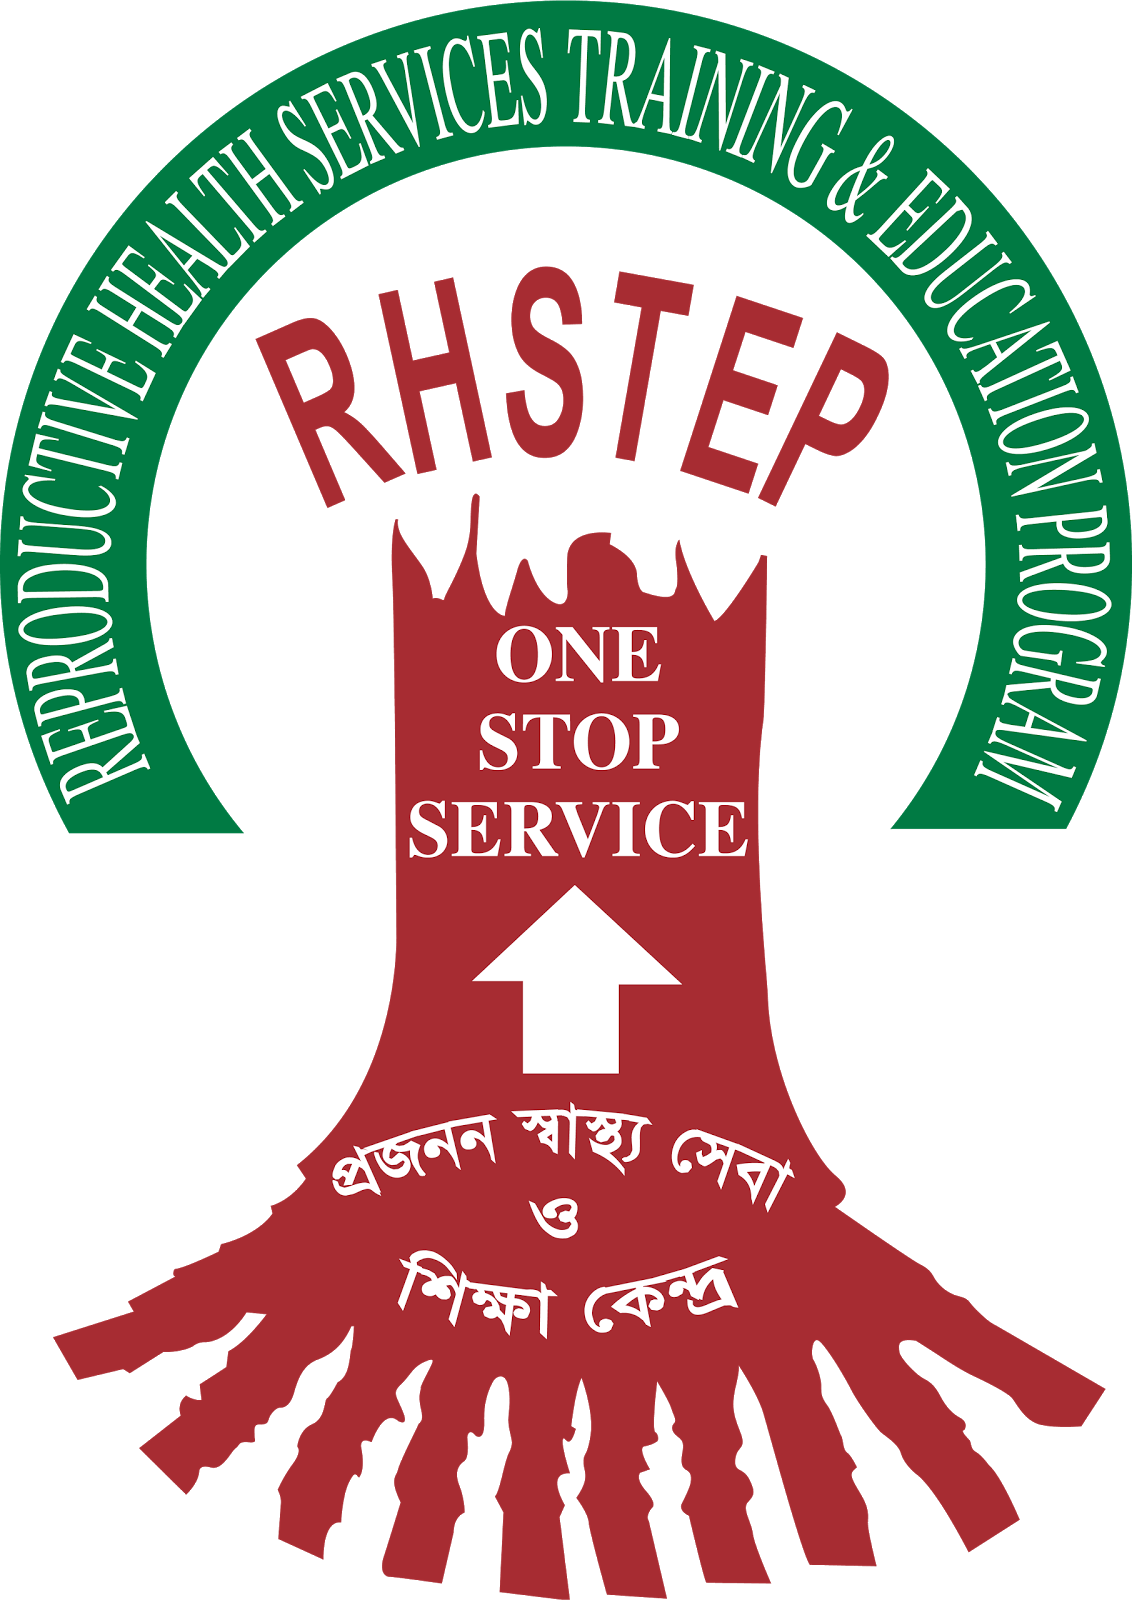 Reproductive Health Services Training and Education Program (RHSTEP)